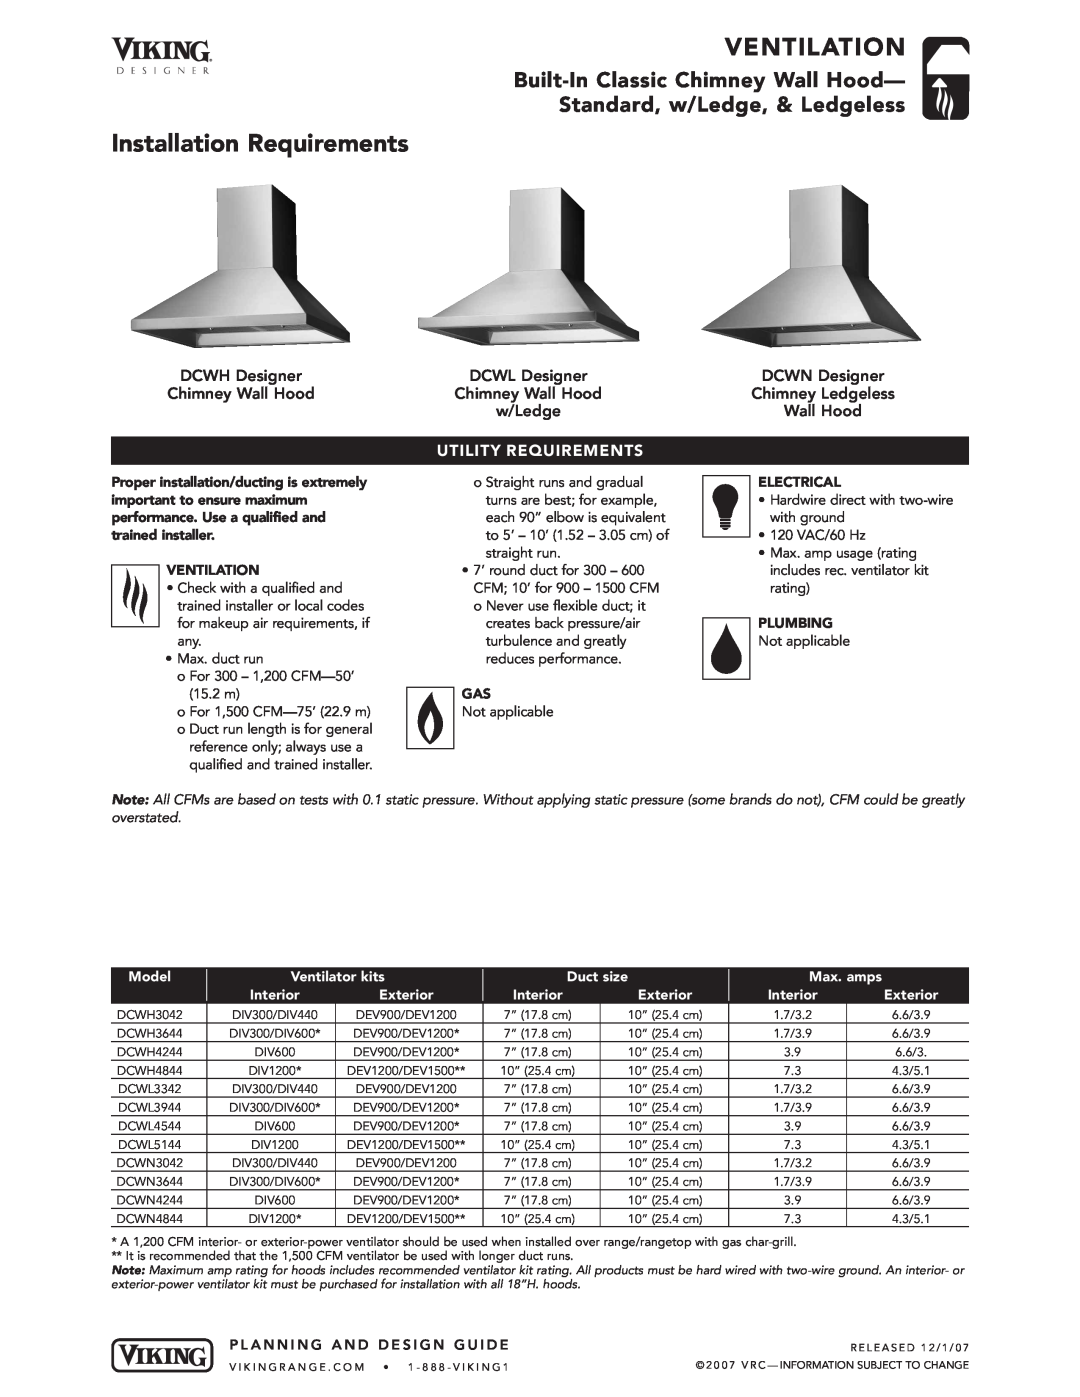 Viking DCWH Installation Requirements, Ventilation, Built-In Classic Chimney Wall Hood Standard, w/Ledge, & Ledgeless 